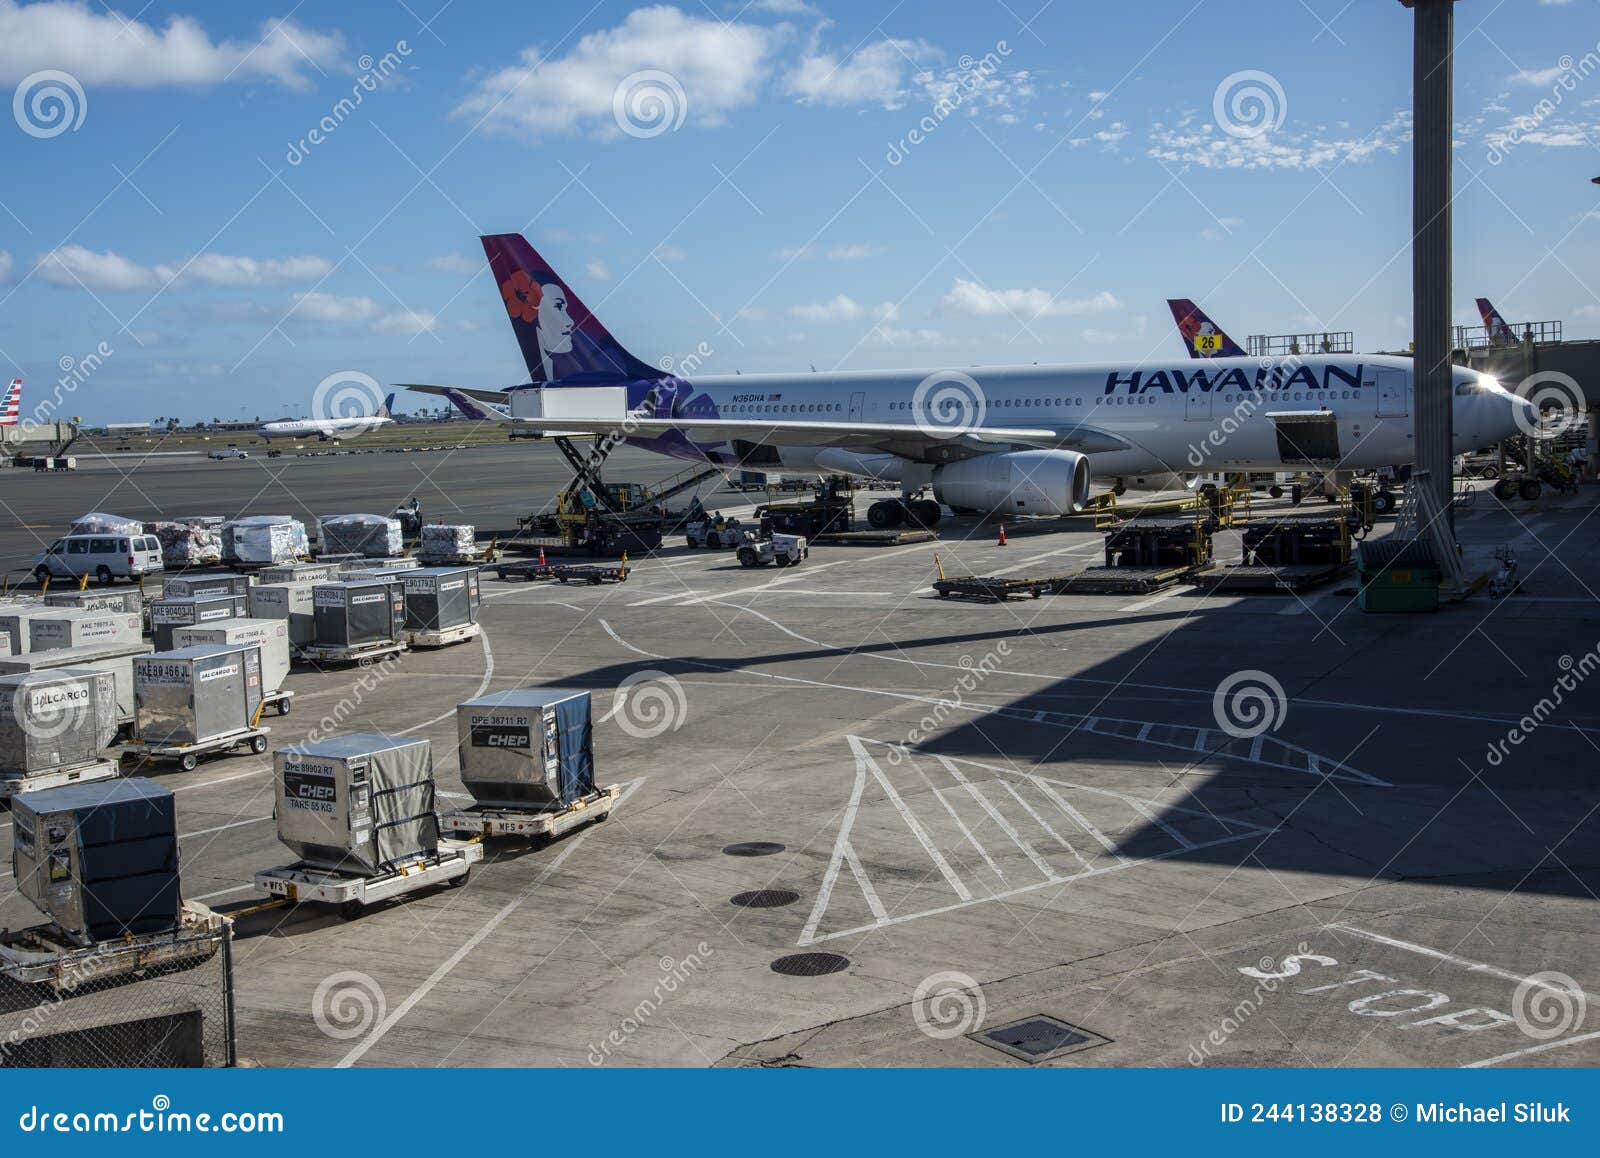 Hawaiian Airlines Airplane Being Fueled and Loaded for the Next Flight ...